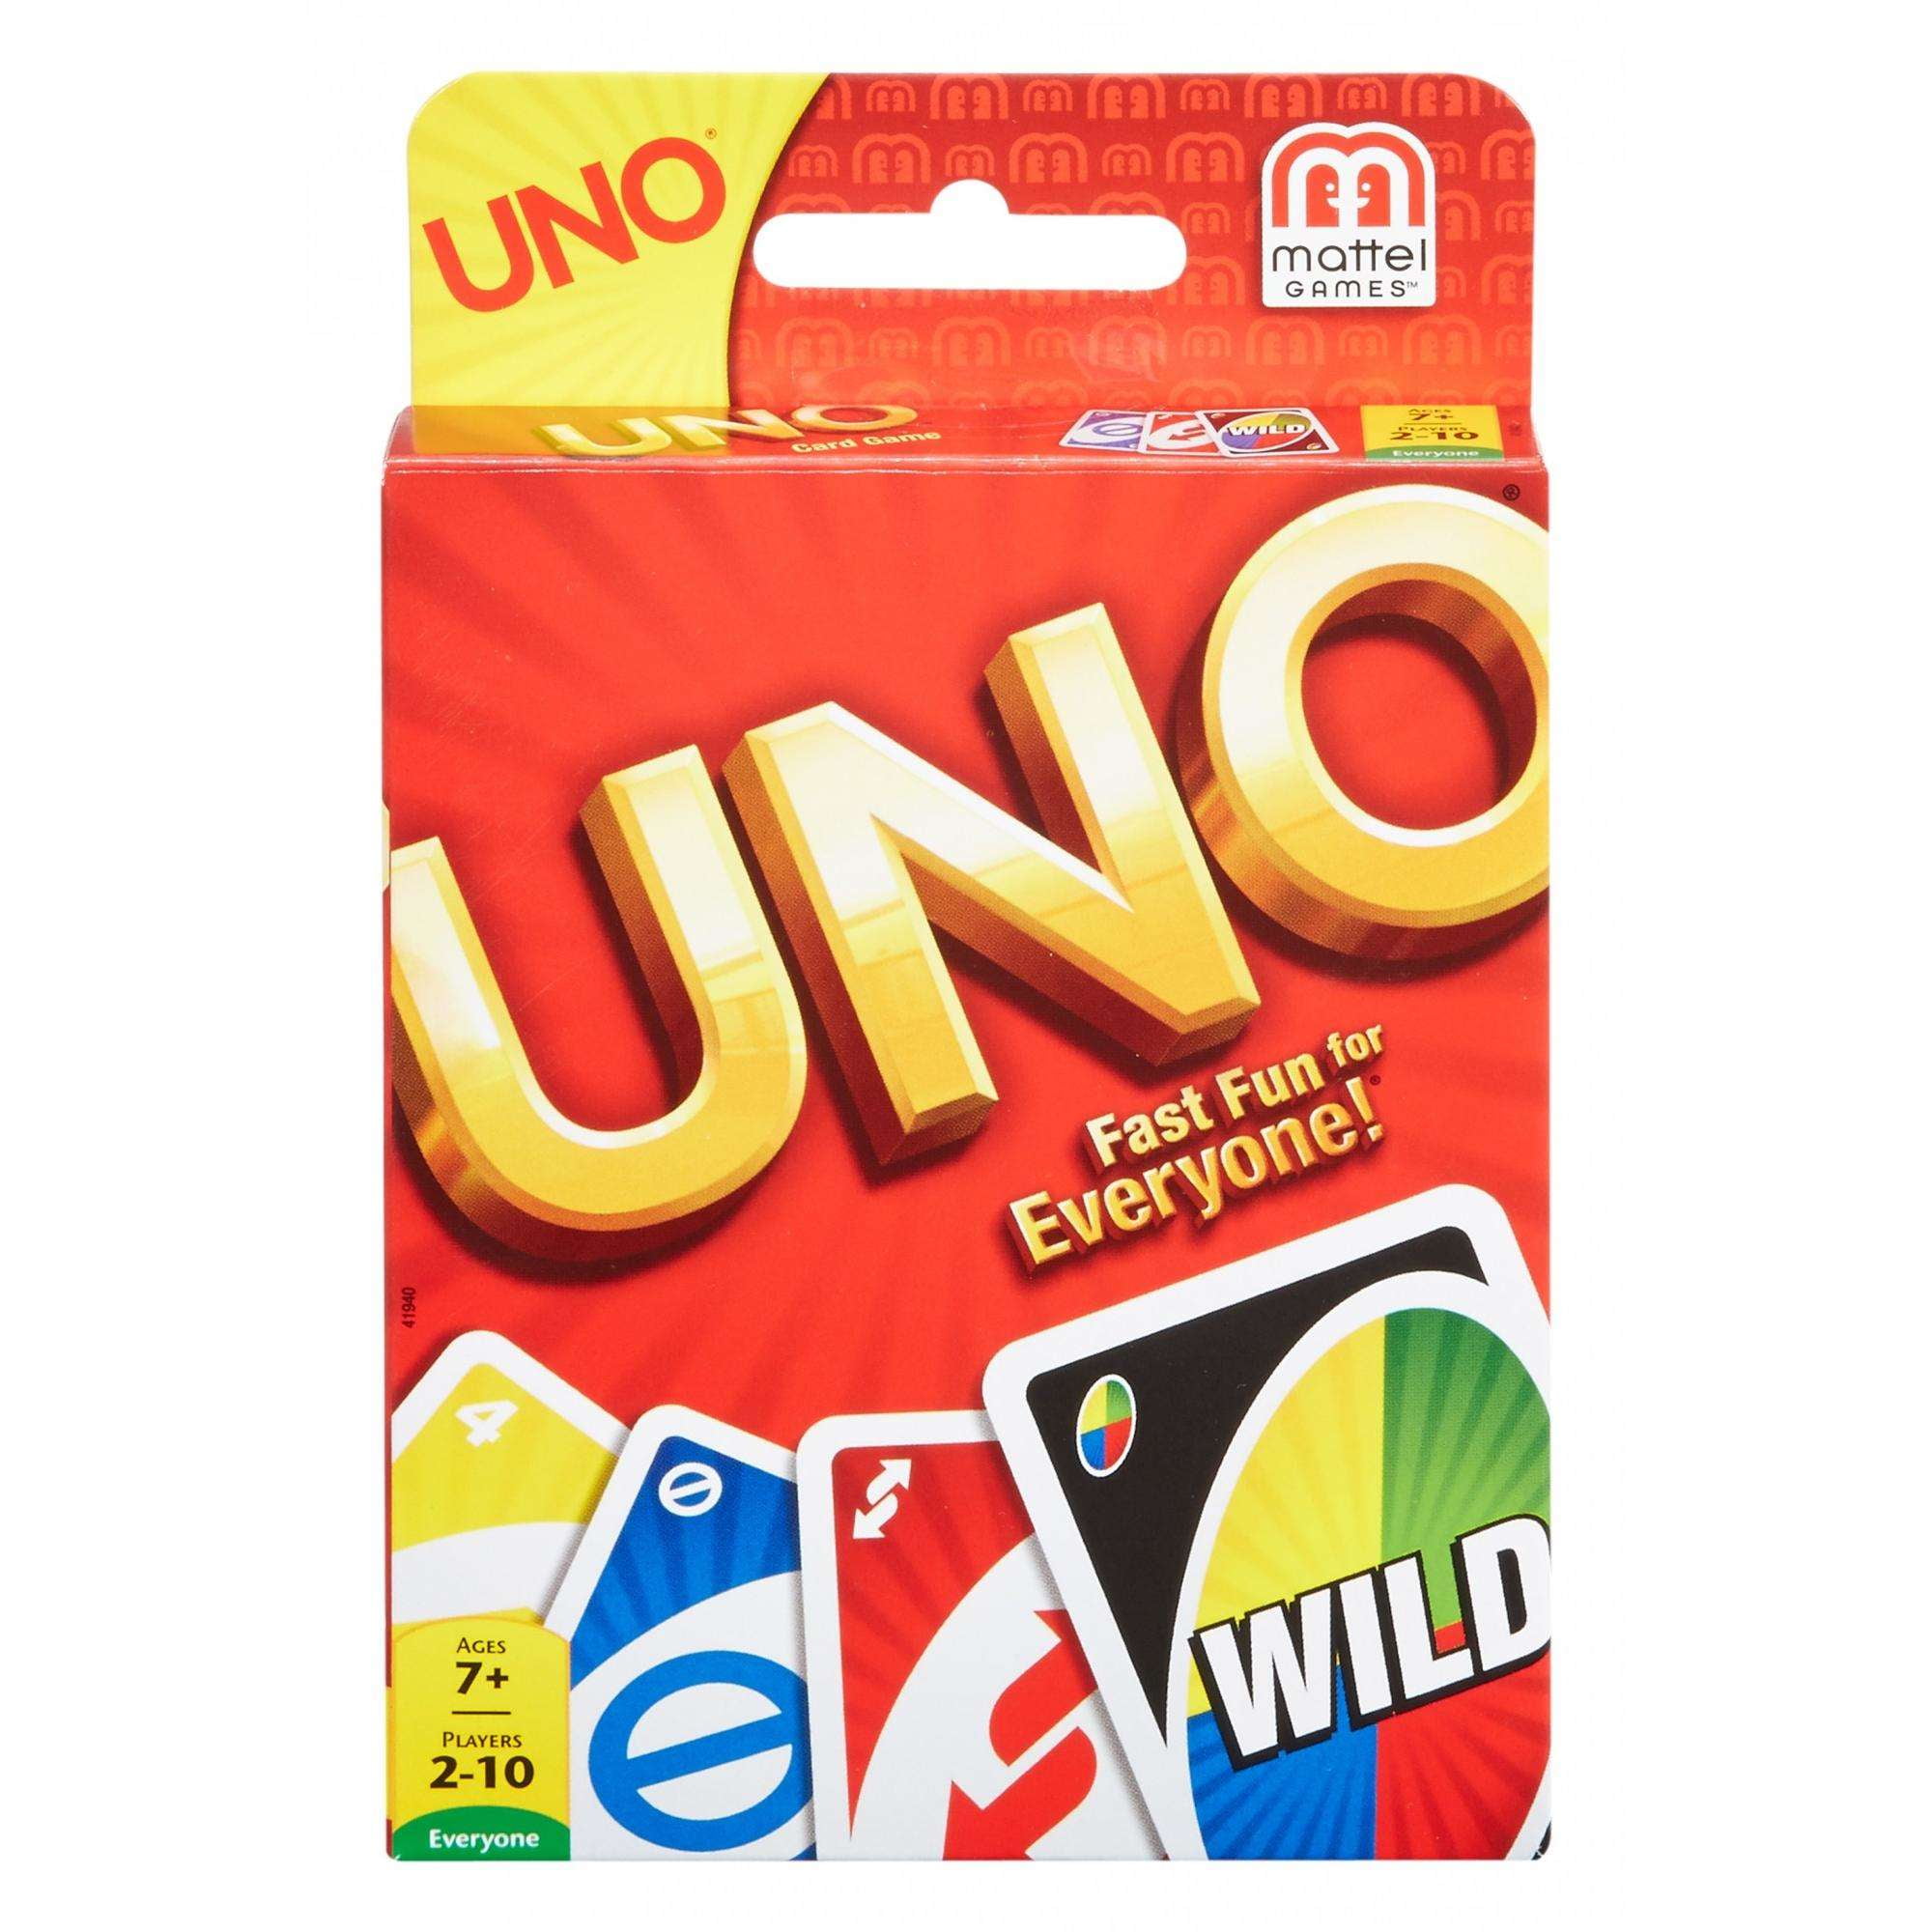  Mattel Games UNO Minimalista Card Game Featuring Designer  Graphics by Warleson Oliviera, 108 Cards, Kid, Family & Adult Game Night,  Unique Design Lovers Ages 7 Years & Older : Toys & Games